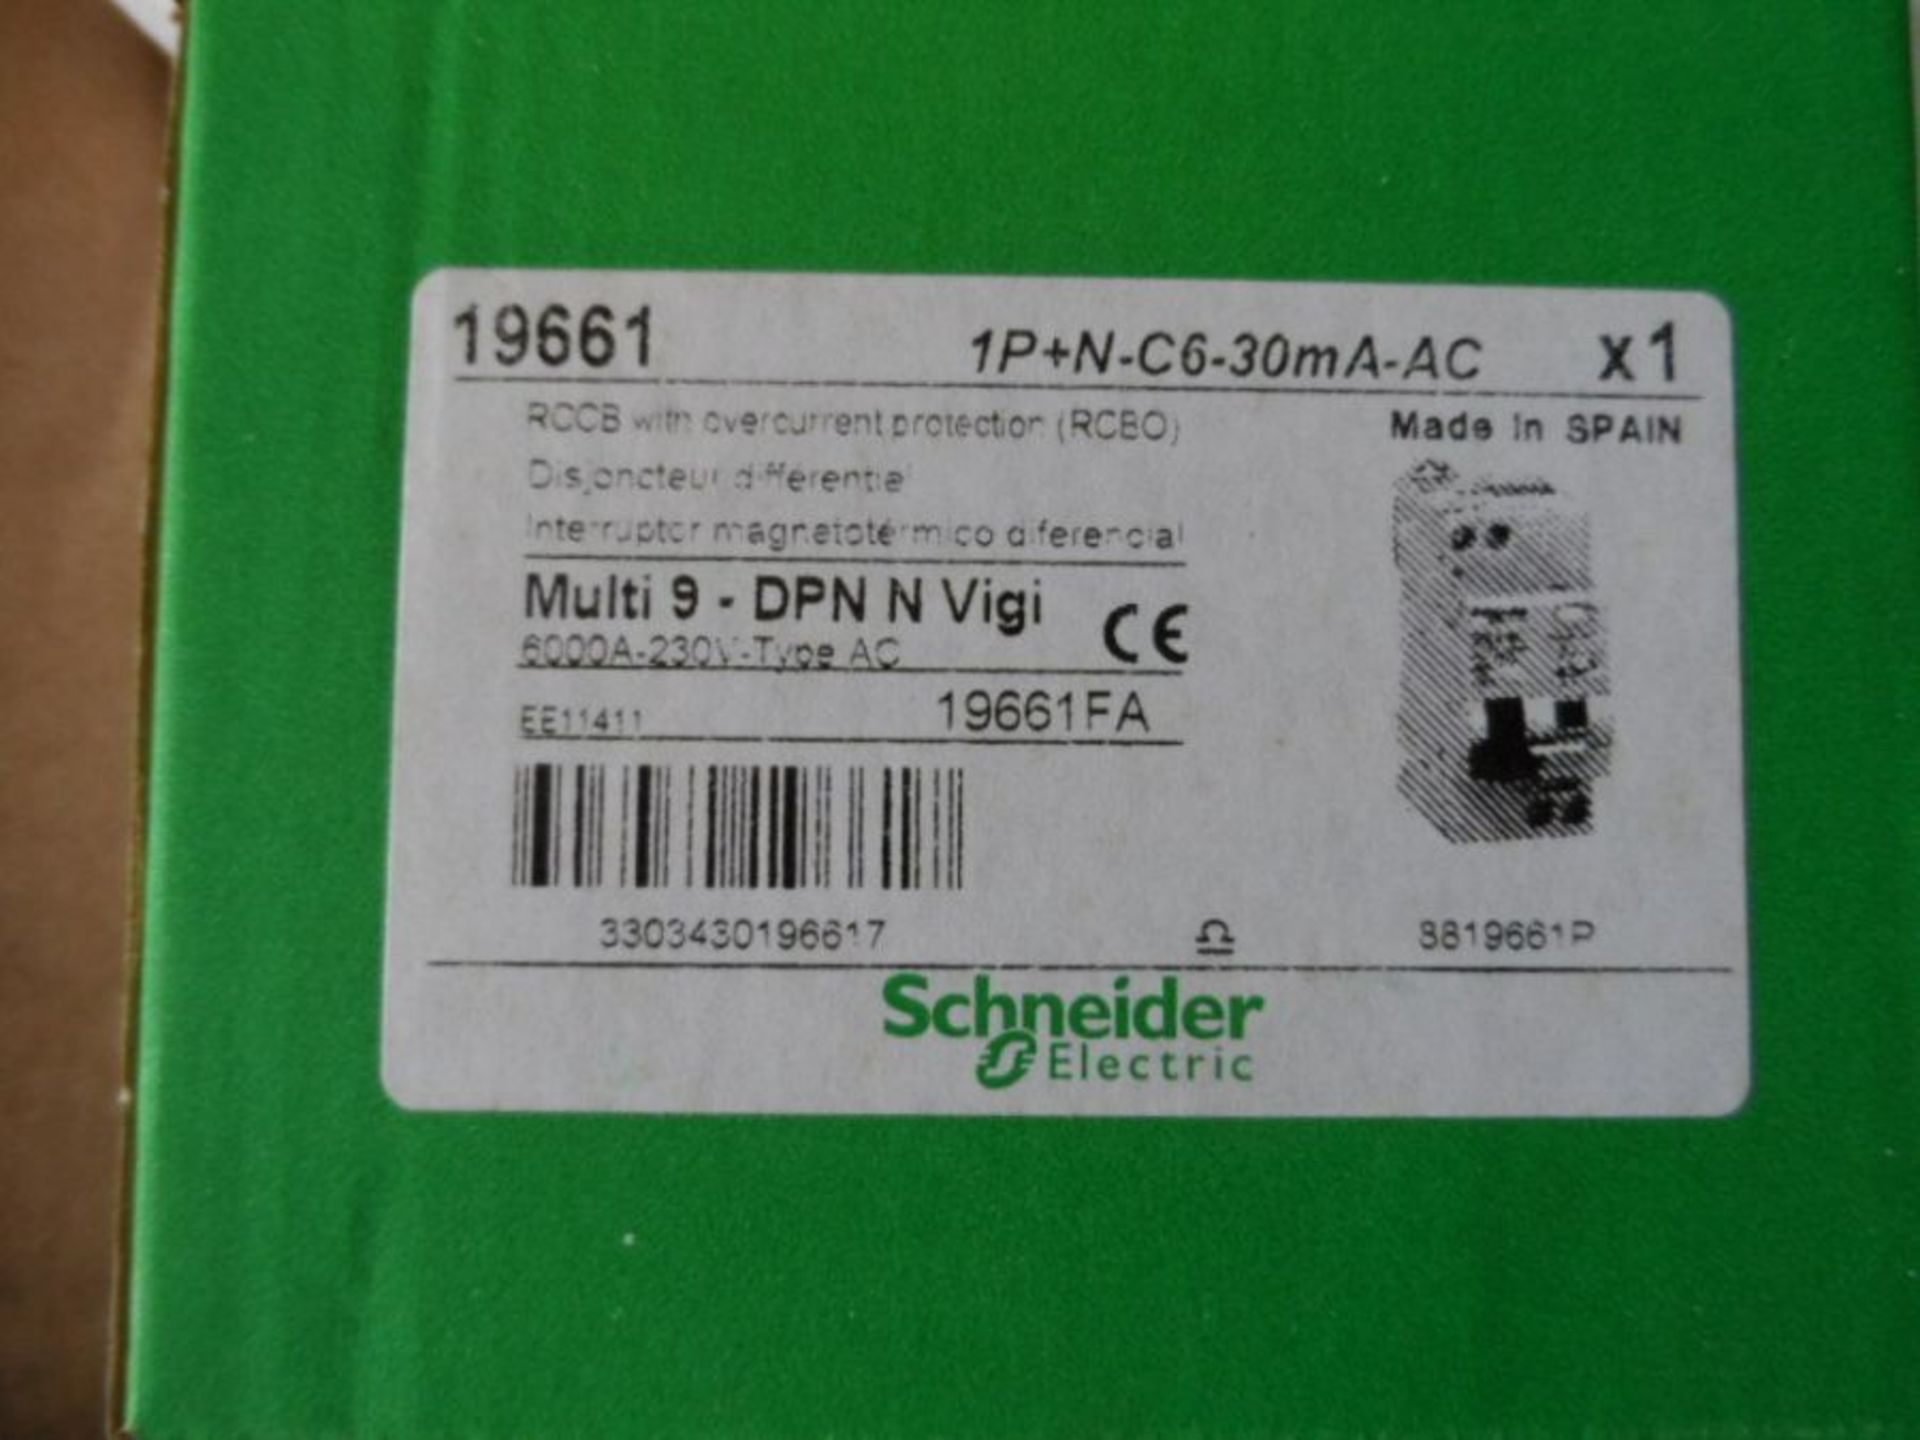 20 x Schneider 1+N Pole Type C RCBO Circuit Breaker Overload Protection 6A 2450075 - Image 2 of 2